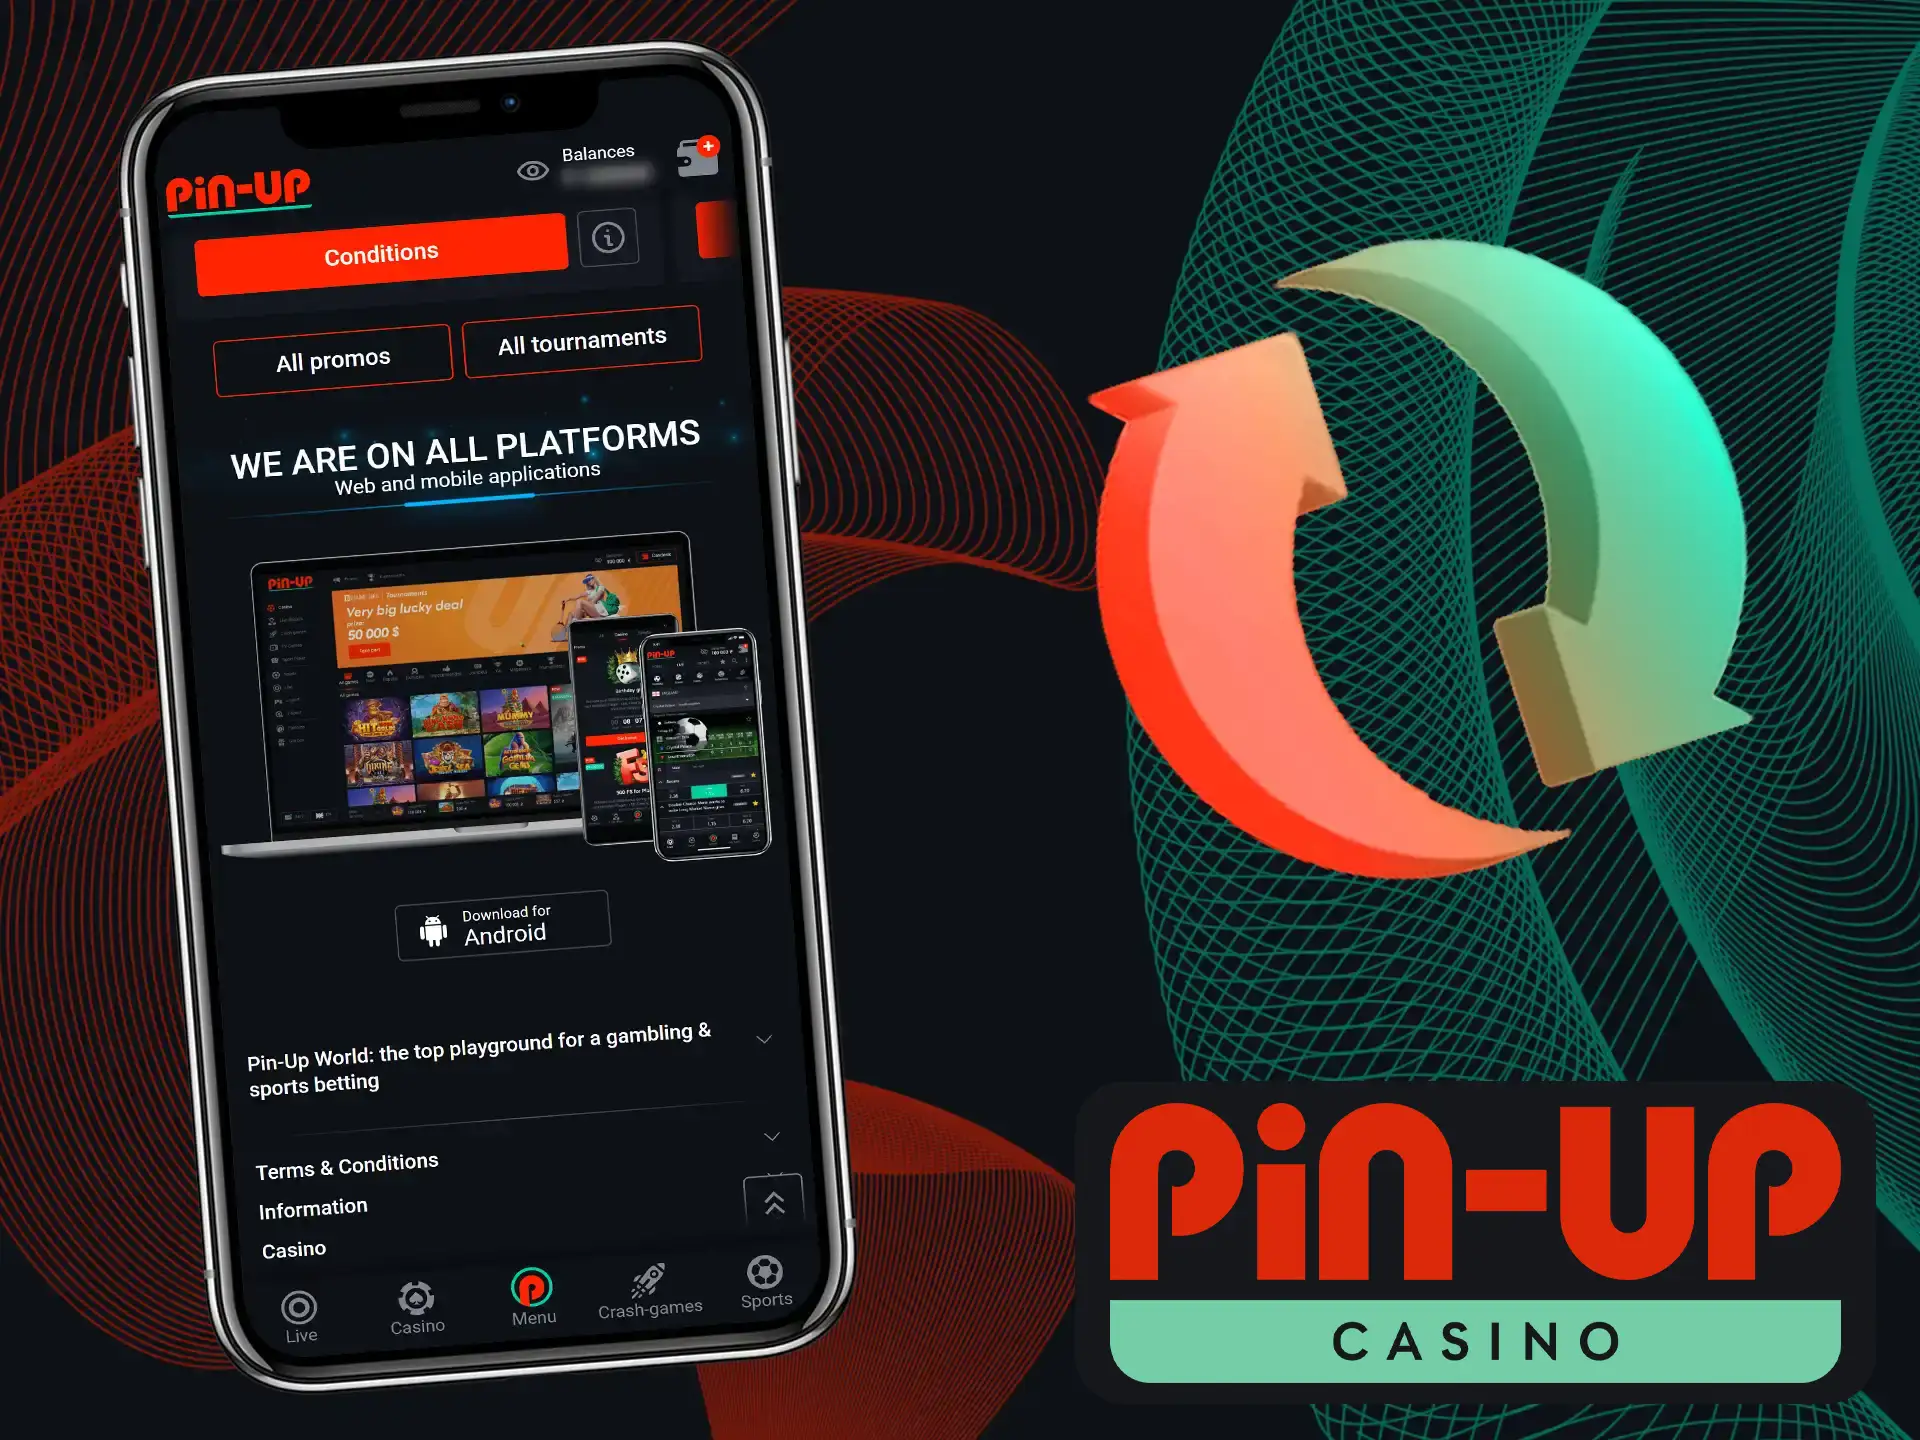 We are consistently incorporating fresh features and enhancements into the Pin-Up Casino app.